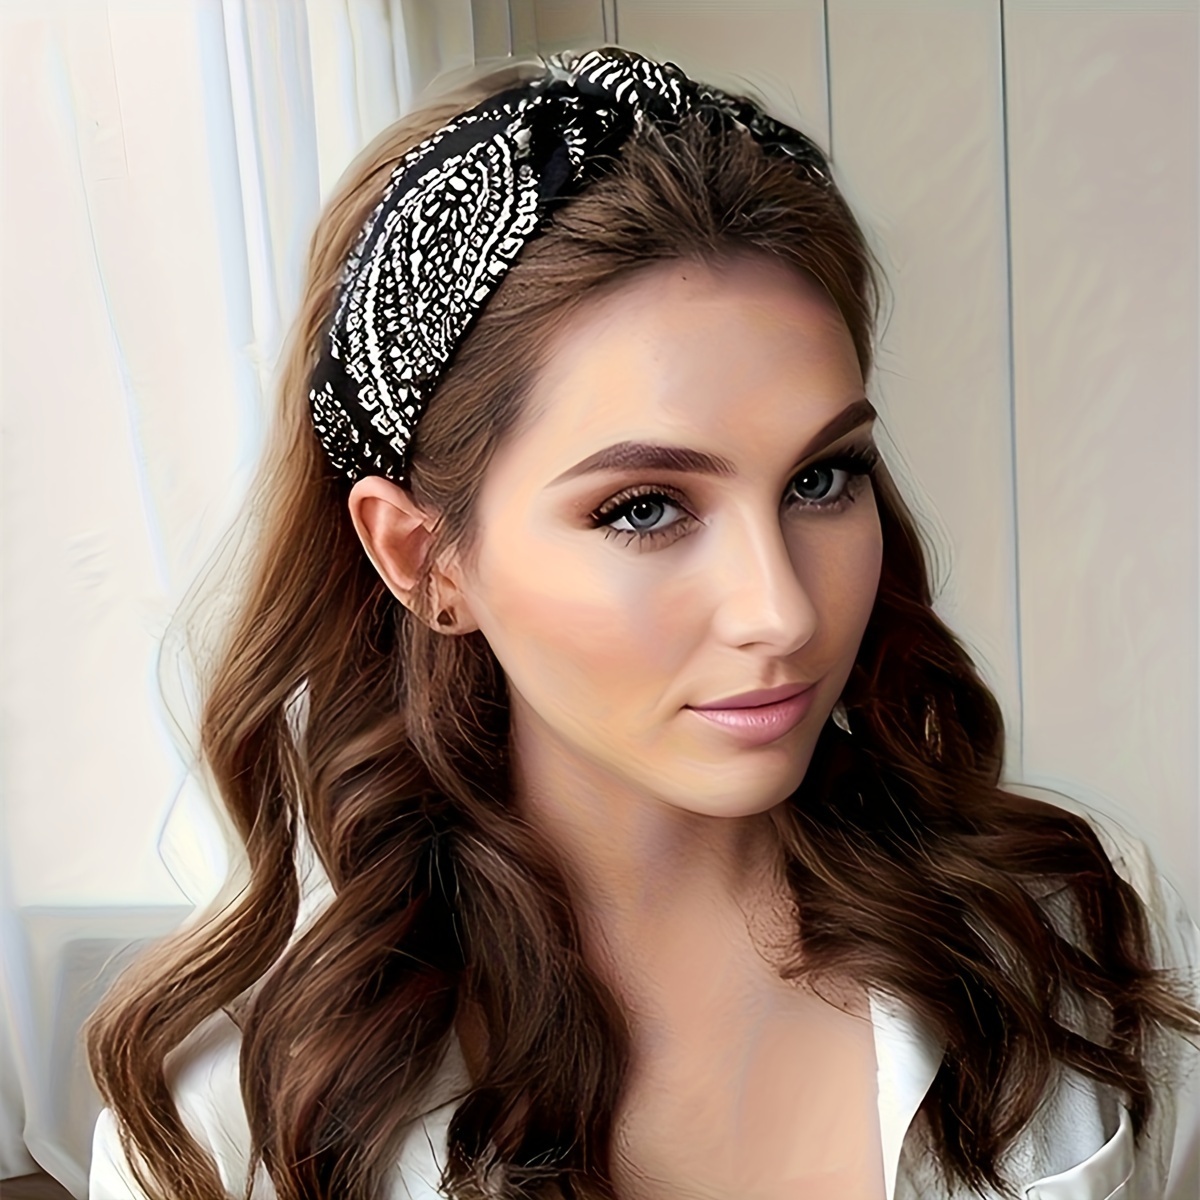 

1pc Elegant Paisley Pattern Hairband, Classic Chic Style, Fashion Hair Accessory For Women, Simple Sophisticated Decorative Headband